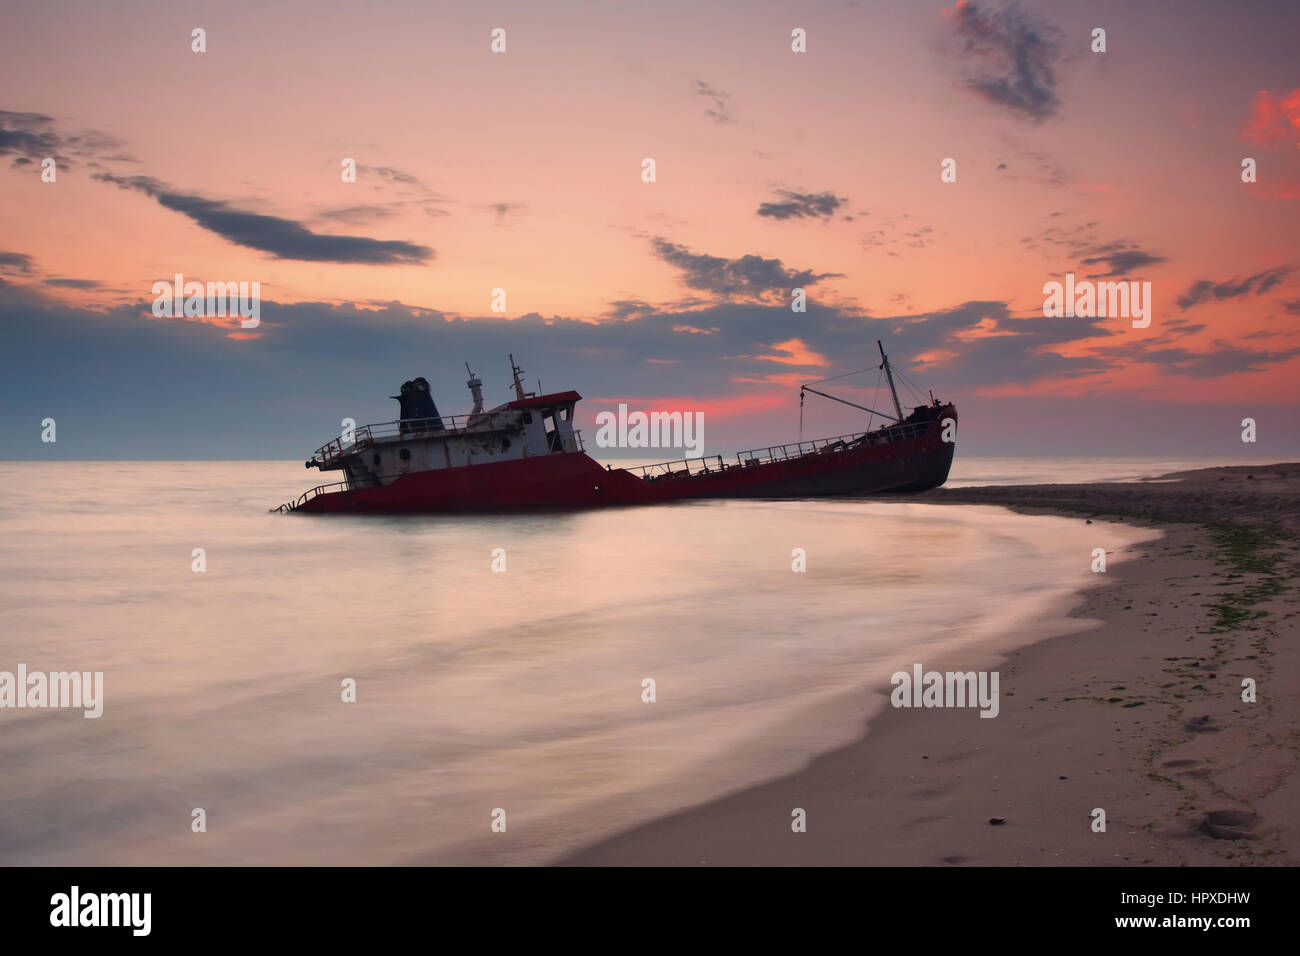 Ship after wreck on the coast during colorful sunset Stock Photo